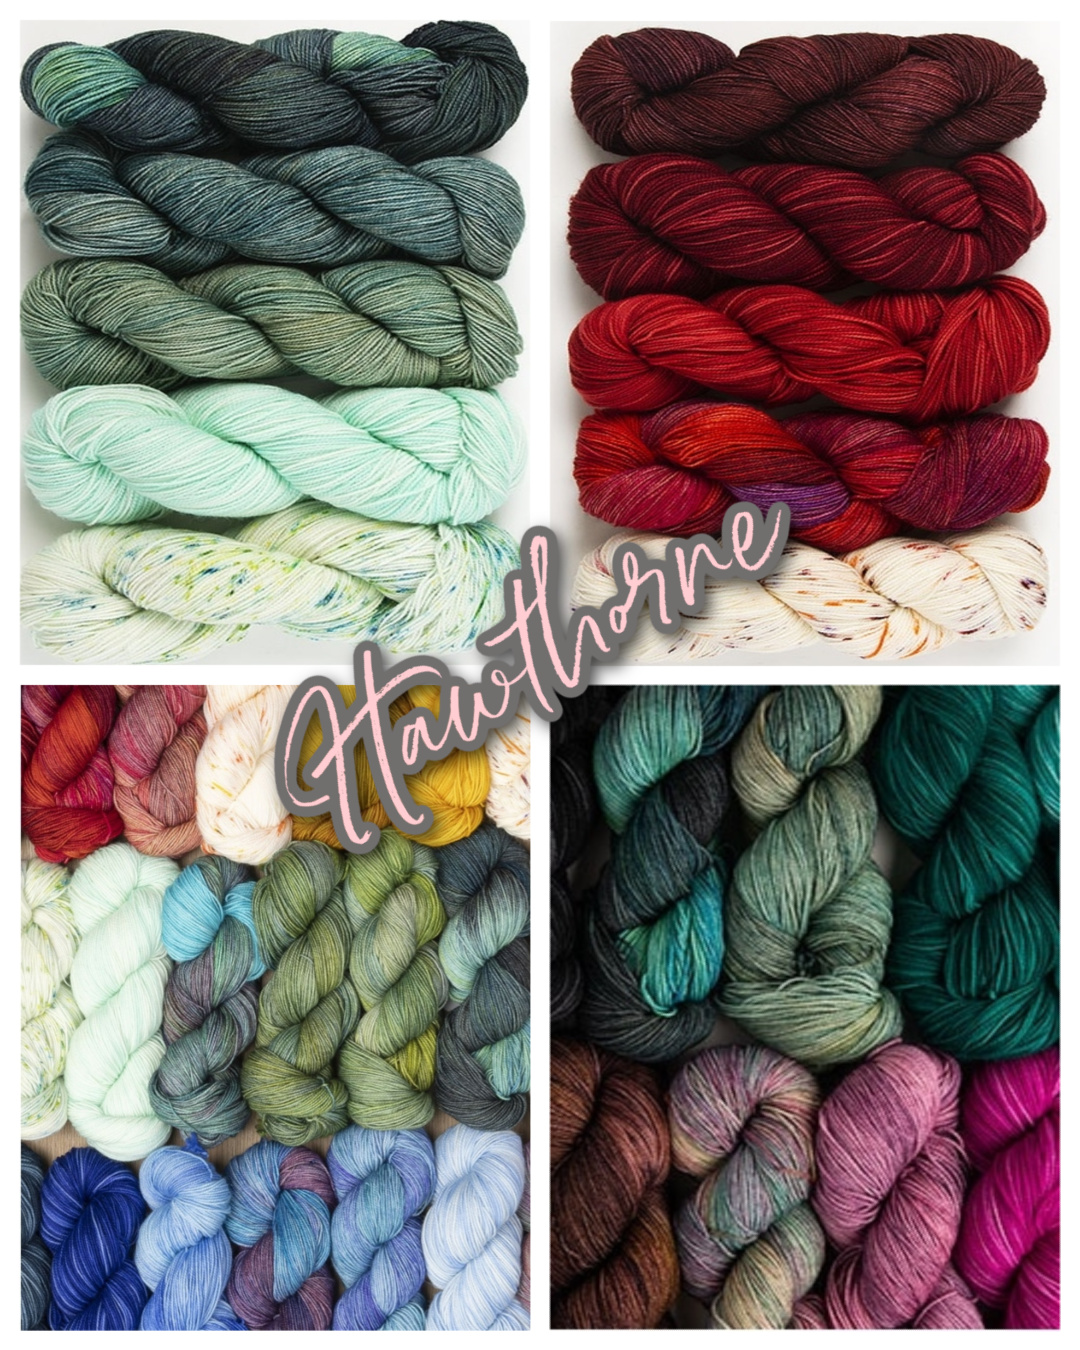 WeCrochet Hawthorne yarn - collage of 4 yarn images on white background. Top left: shades of greens, top right: shades of reds, bottom left: all colors - reds, yellows, greens, blues, bottom right: dark greens and dark pinks. Marly Bird.